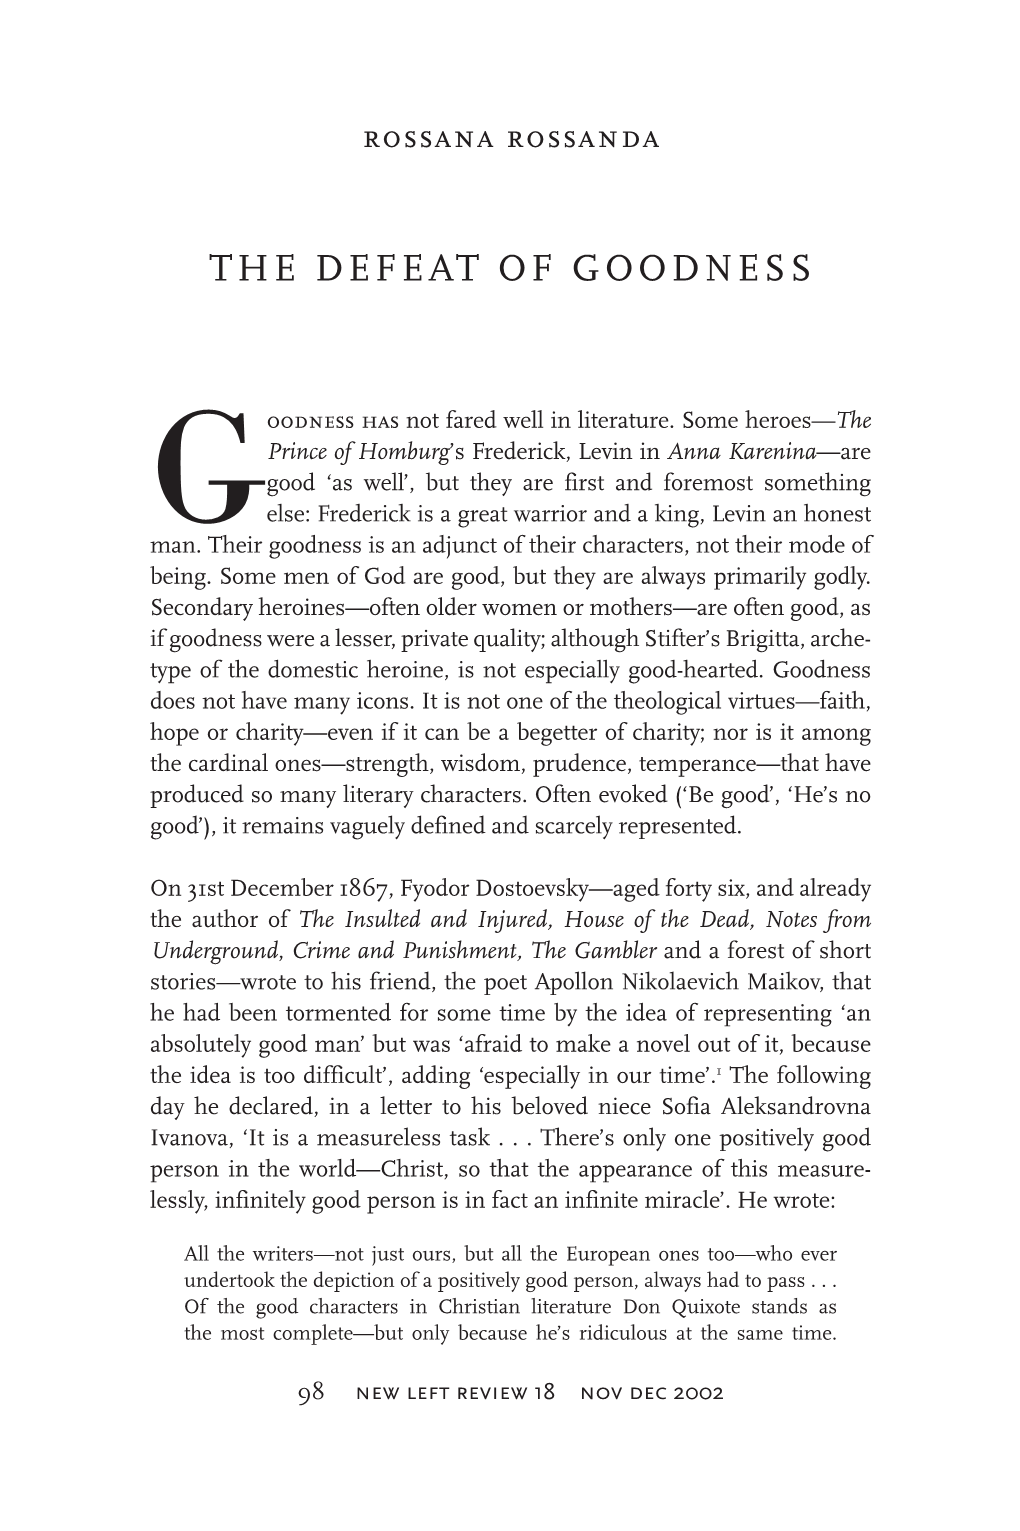 The Defeat of Goodness